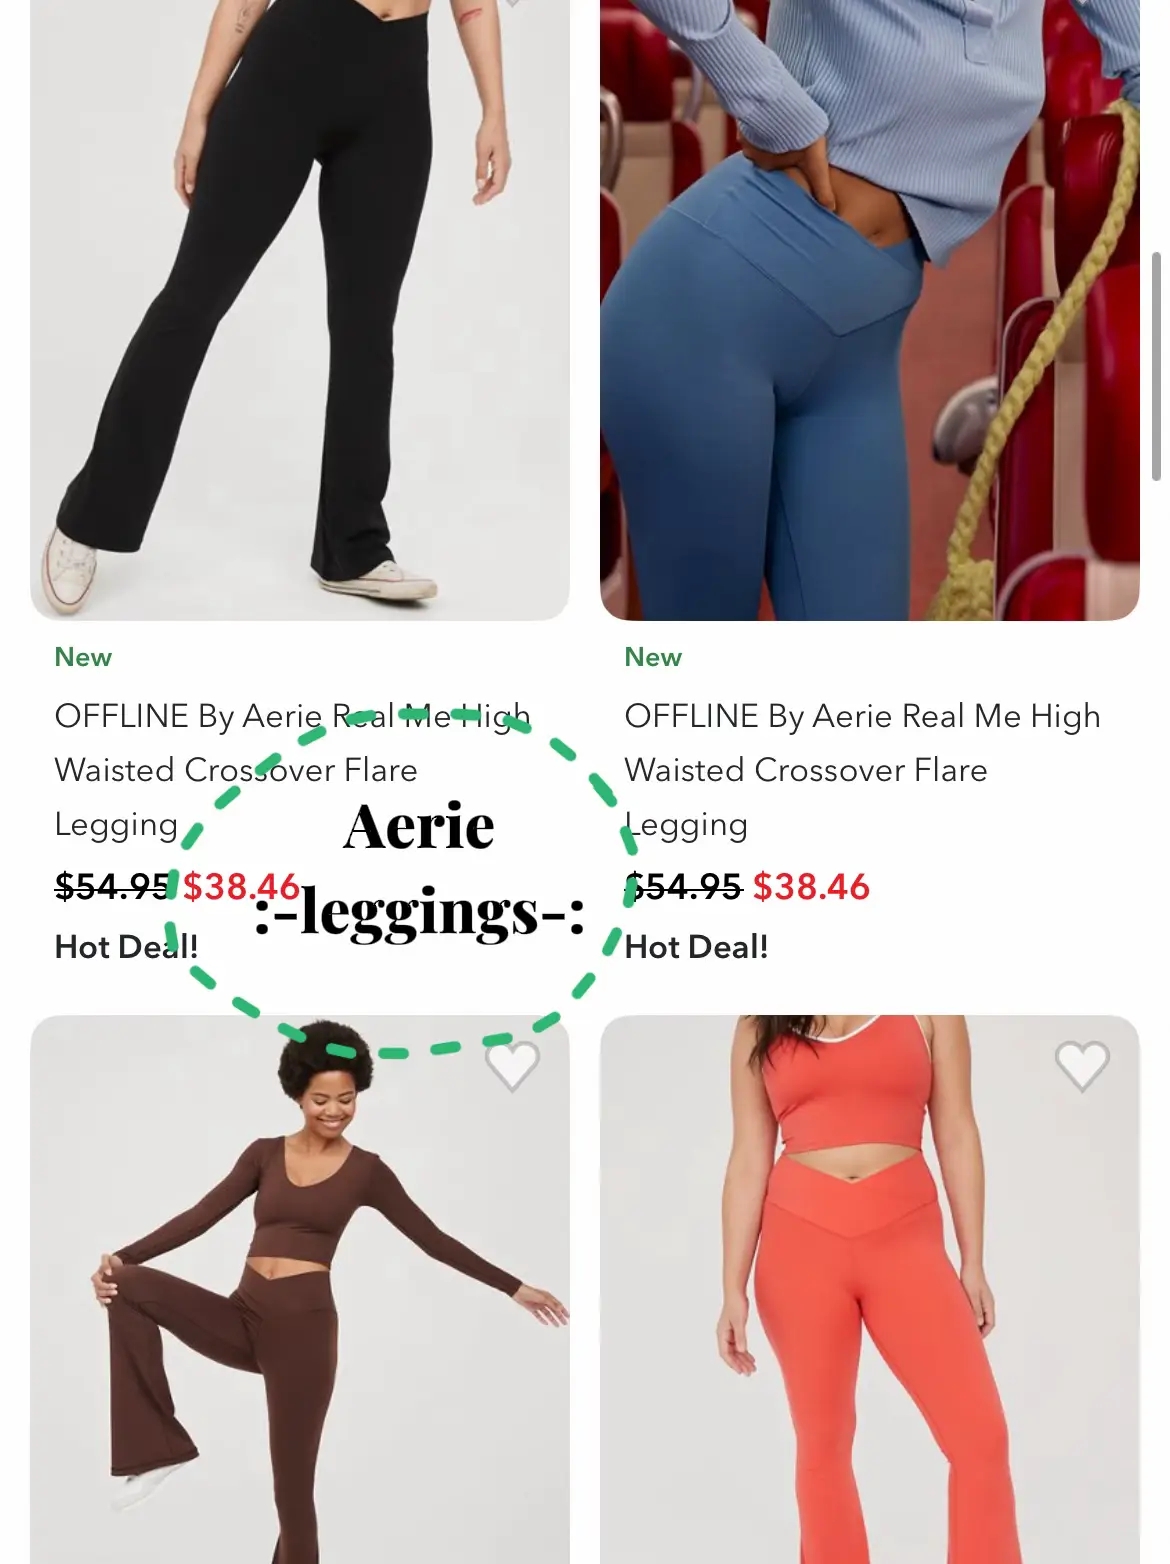 Aerie - OFFLINE By Aerie Real Me High Waisted Crossover Flare